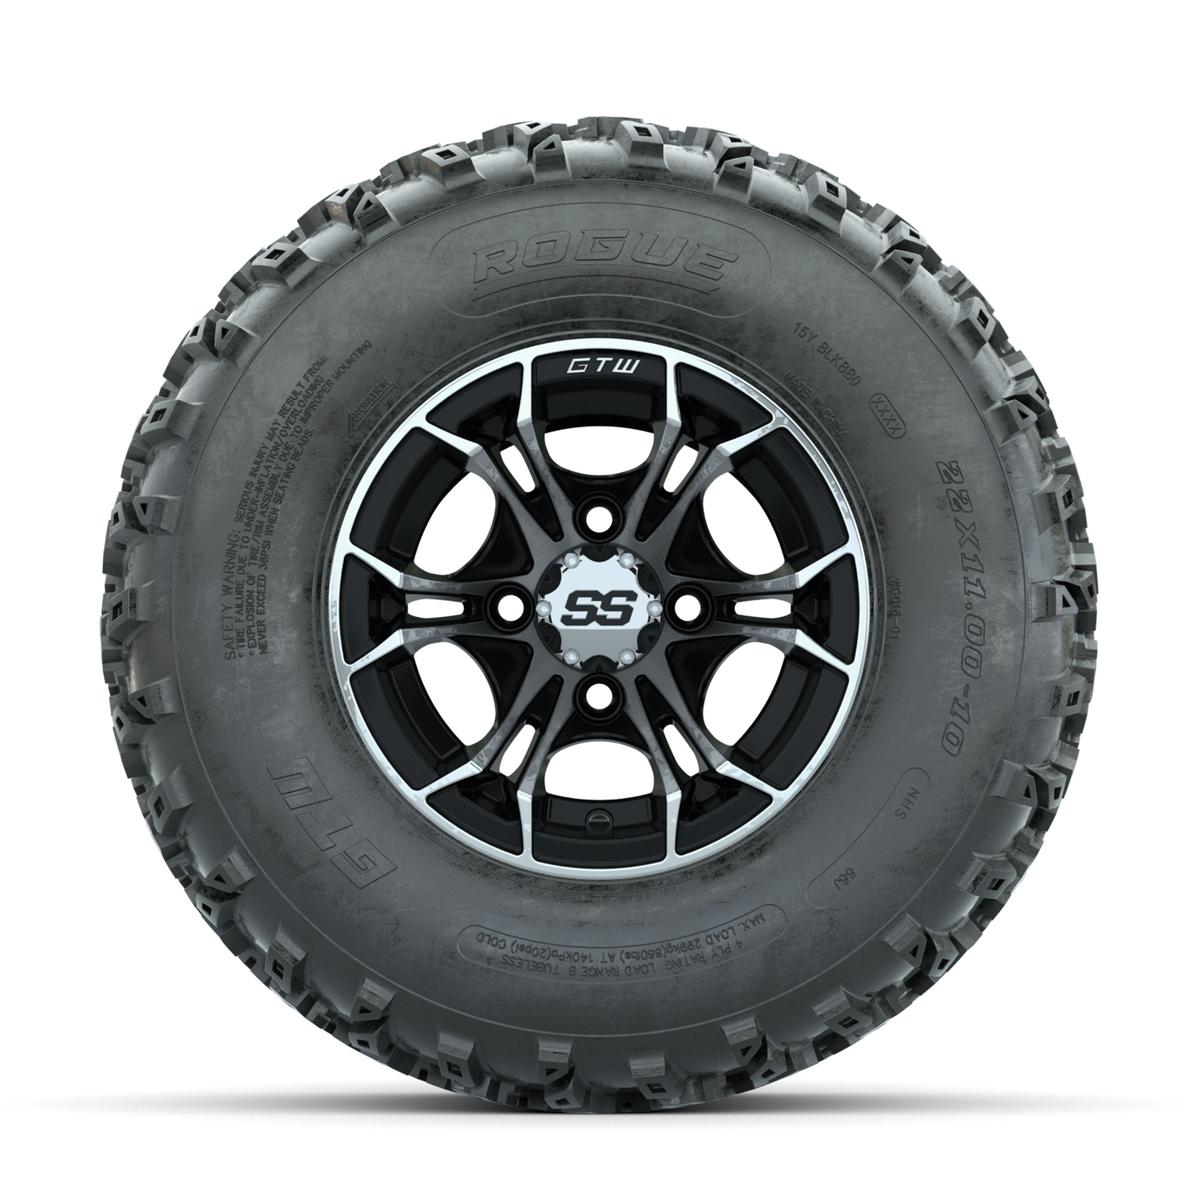 GTW Spyder Machined/Black 10 in Wheels with 22x11.00-10 Rogue All Terrain Tires �� Full Set